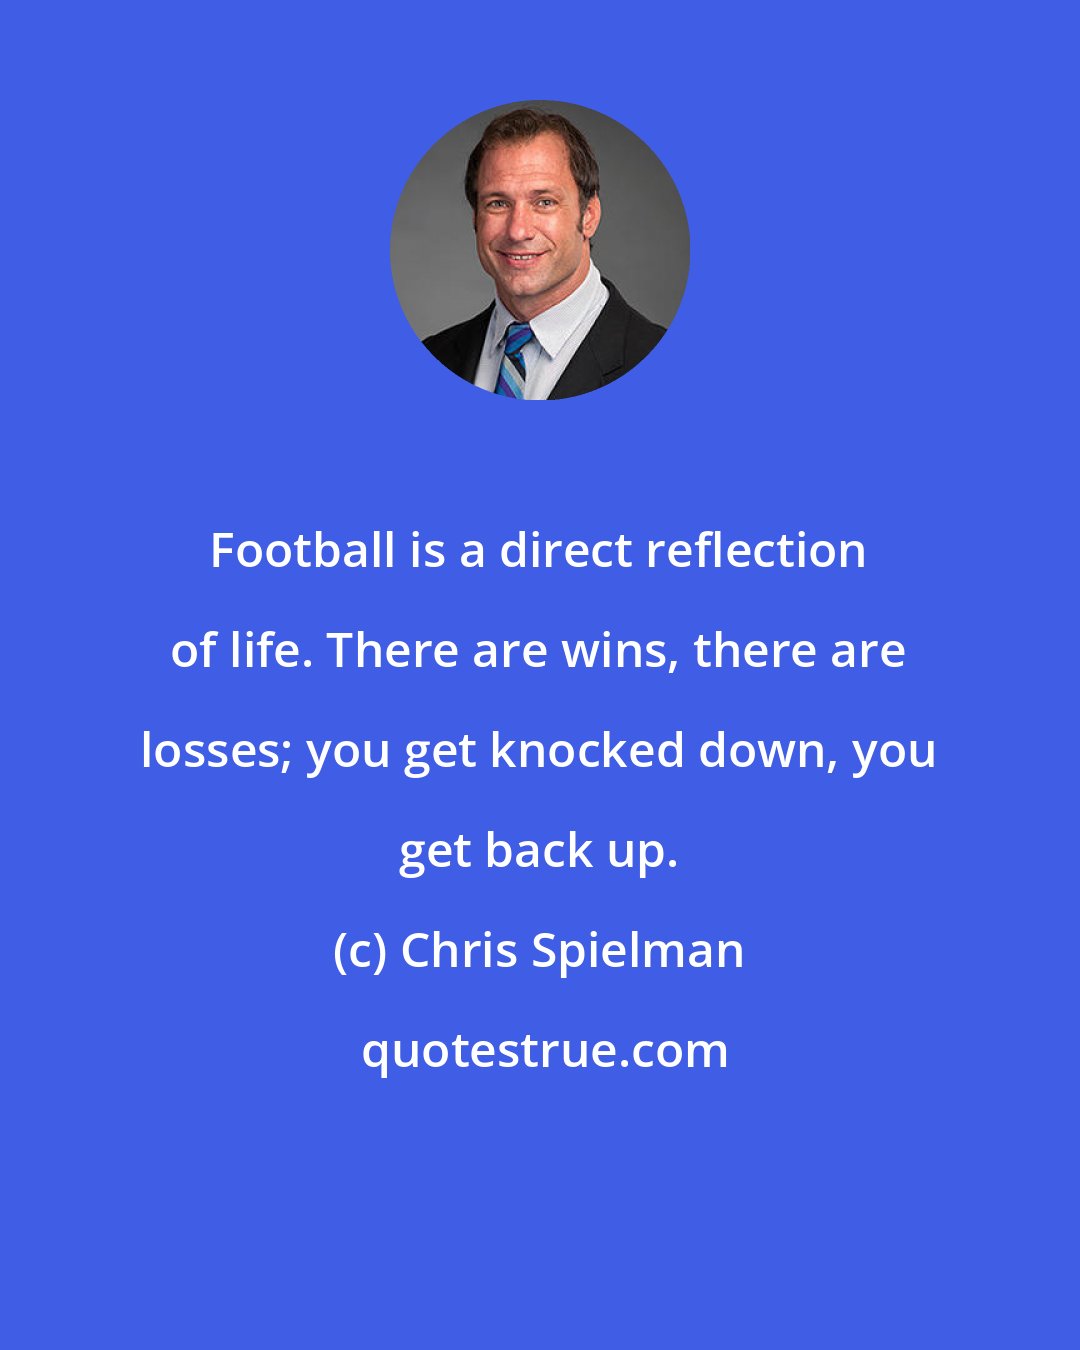 Chris Spielman: Football is a direct reflection of life. There are wins, there are losses; you get knocked down, you get back up.